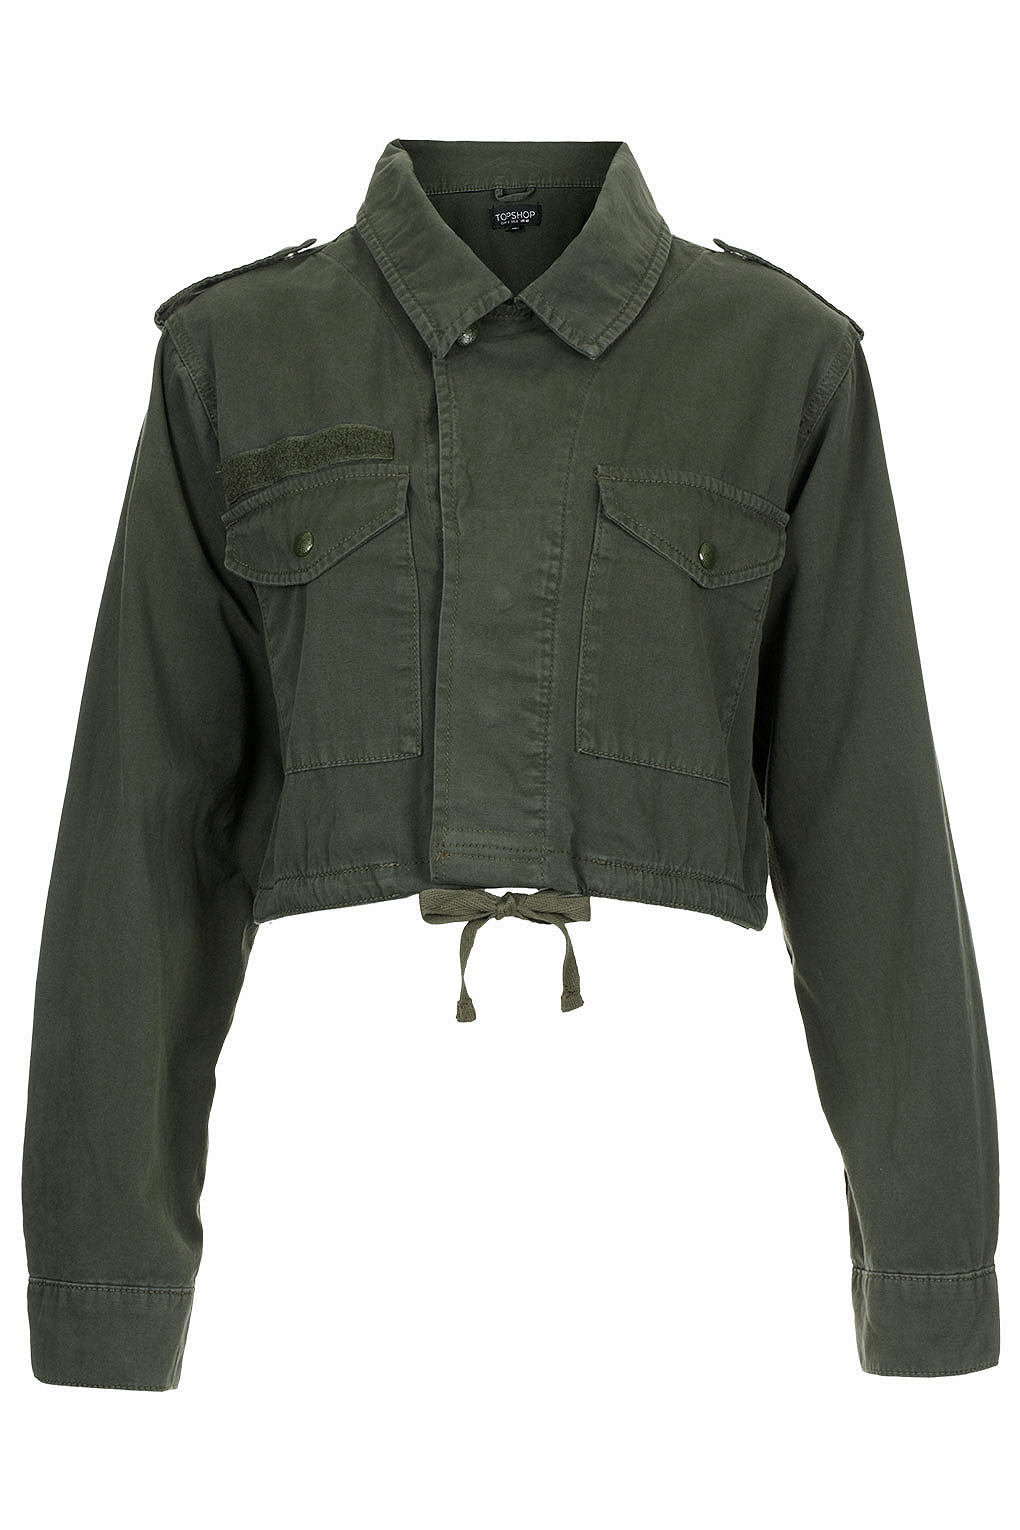 Lyst - Topshop Cropped Army Jacket in Green